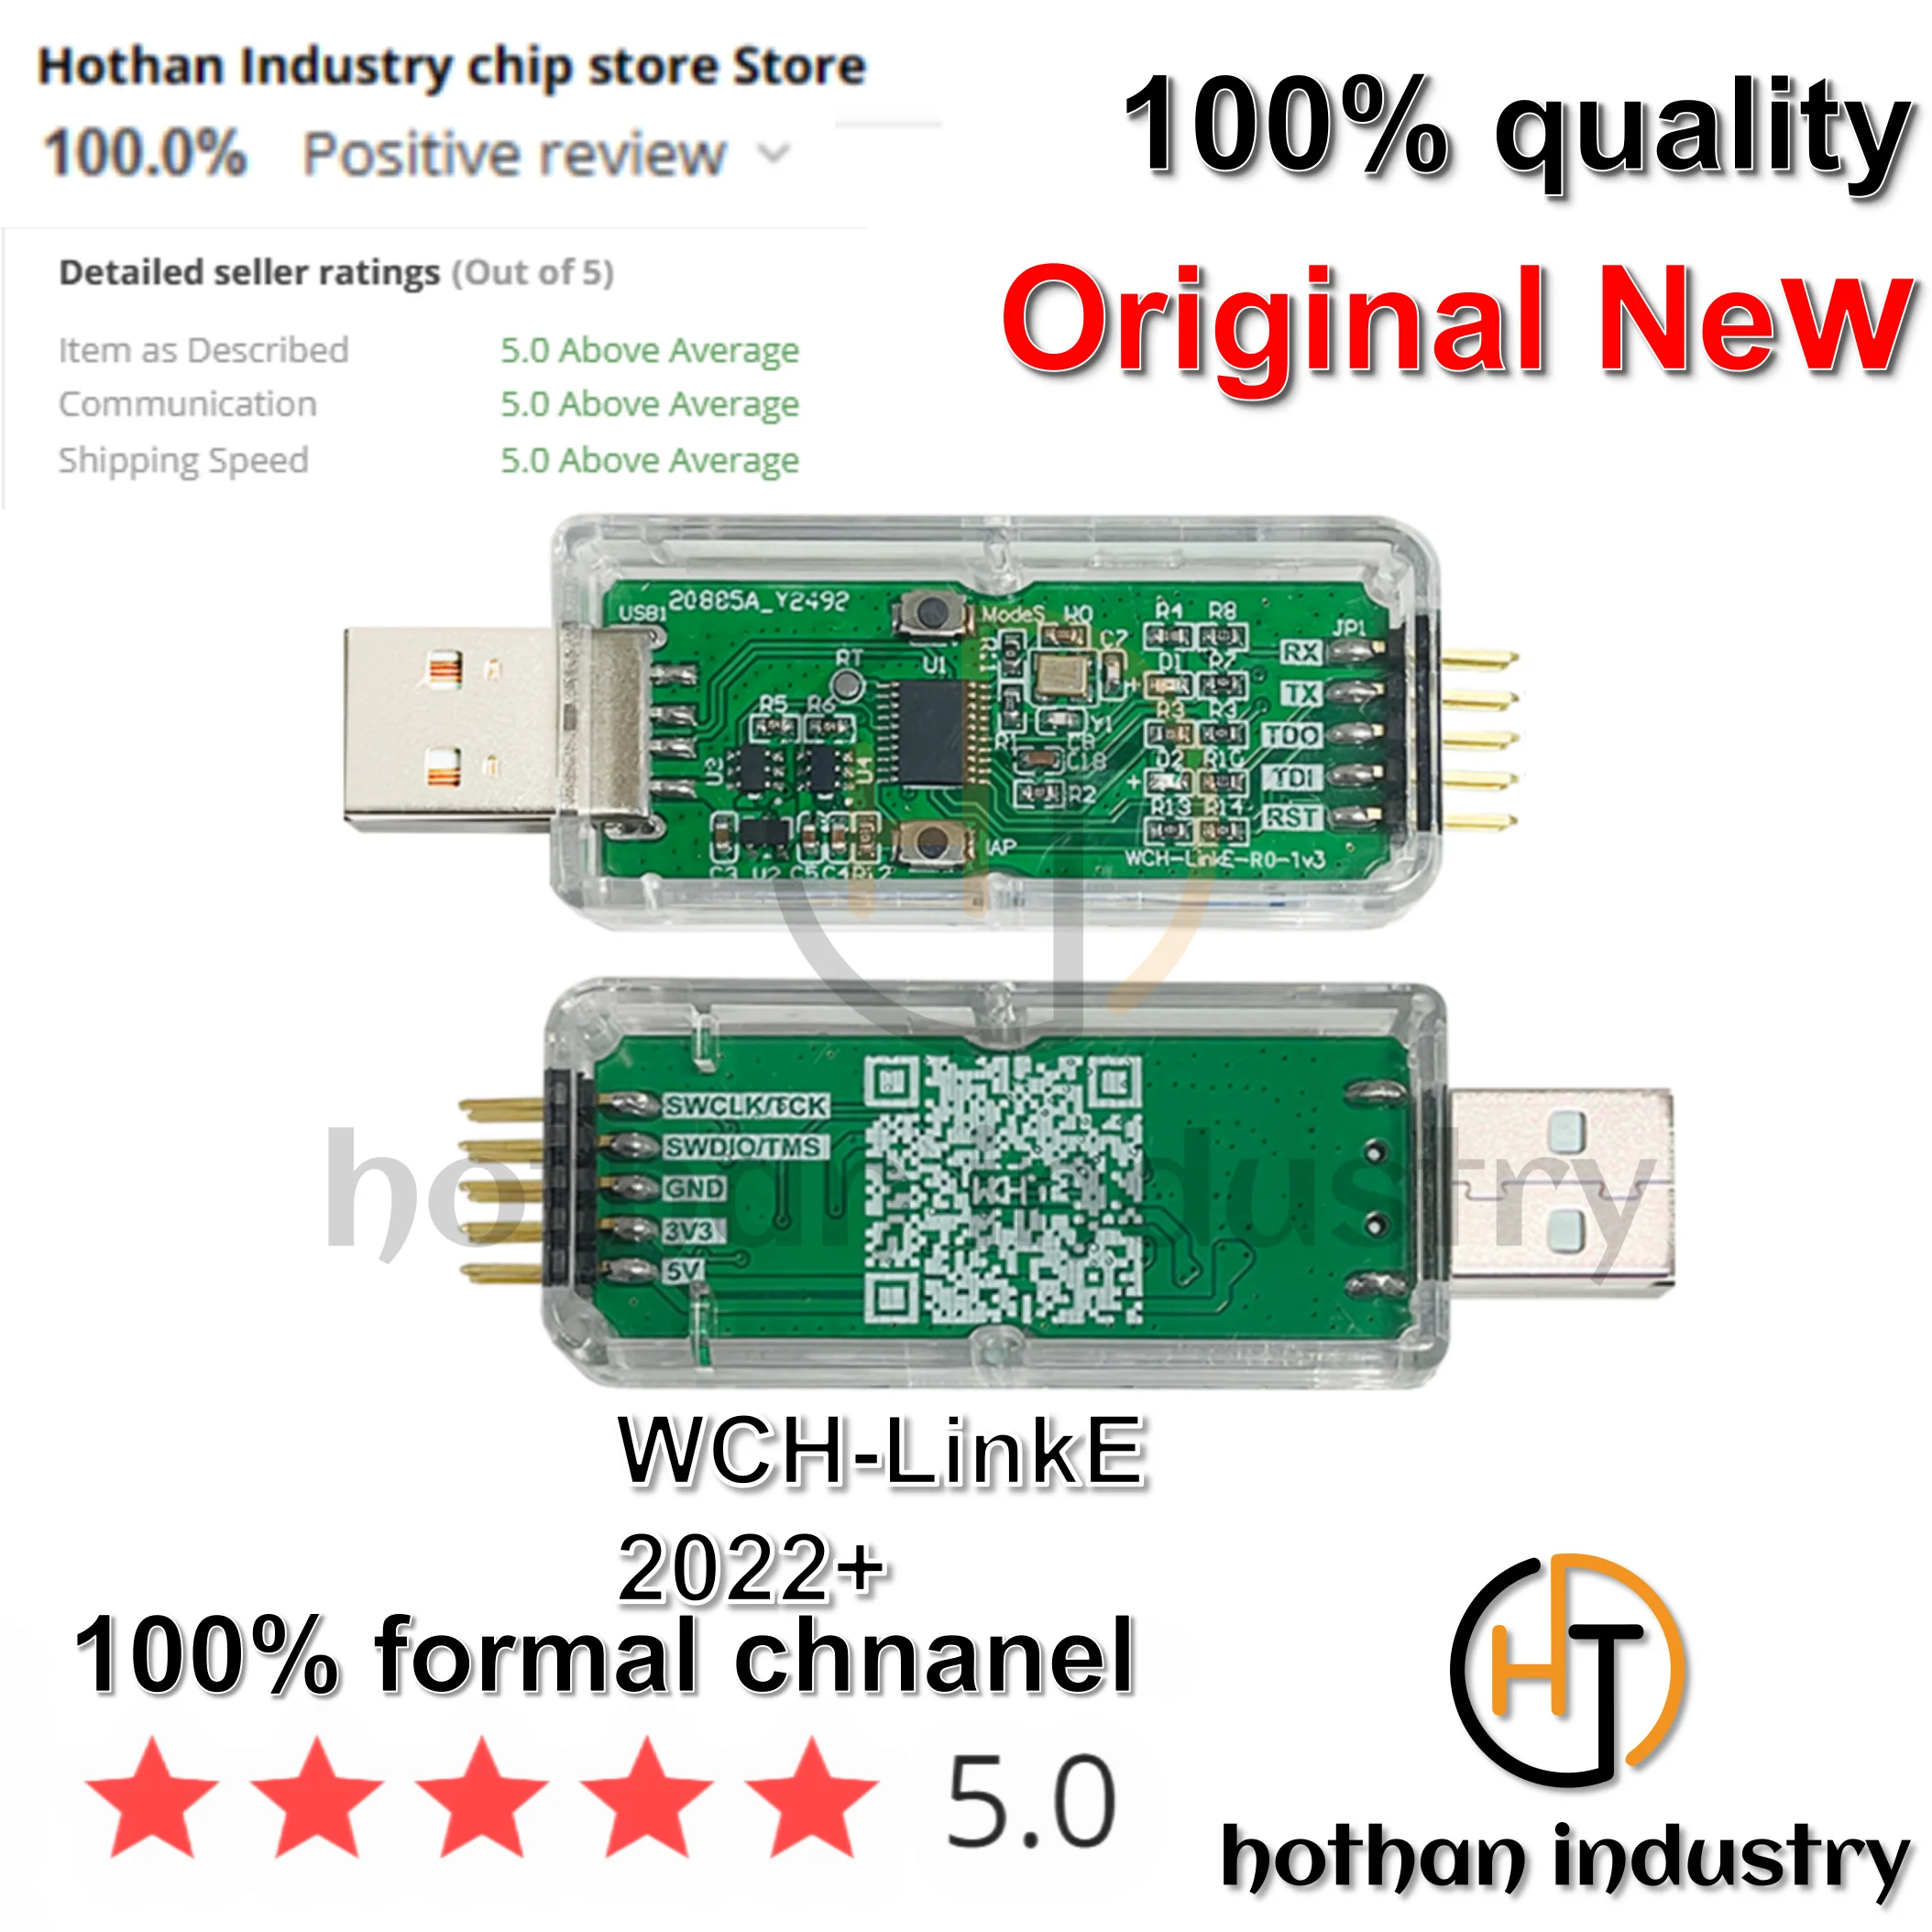 

【1PCS】100% WCH-LinkE Online Download Debugger Support WCH RISC-V Architecture MCU/SWD Interface ARM Chip 1 Serial Port to